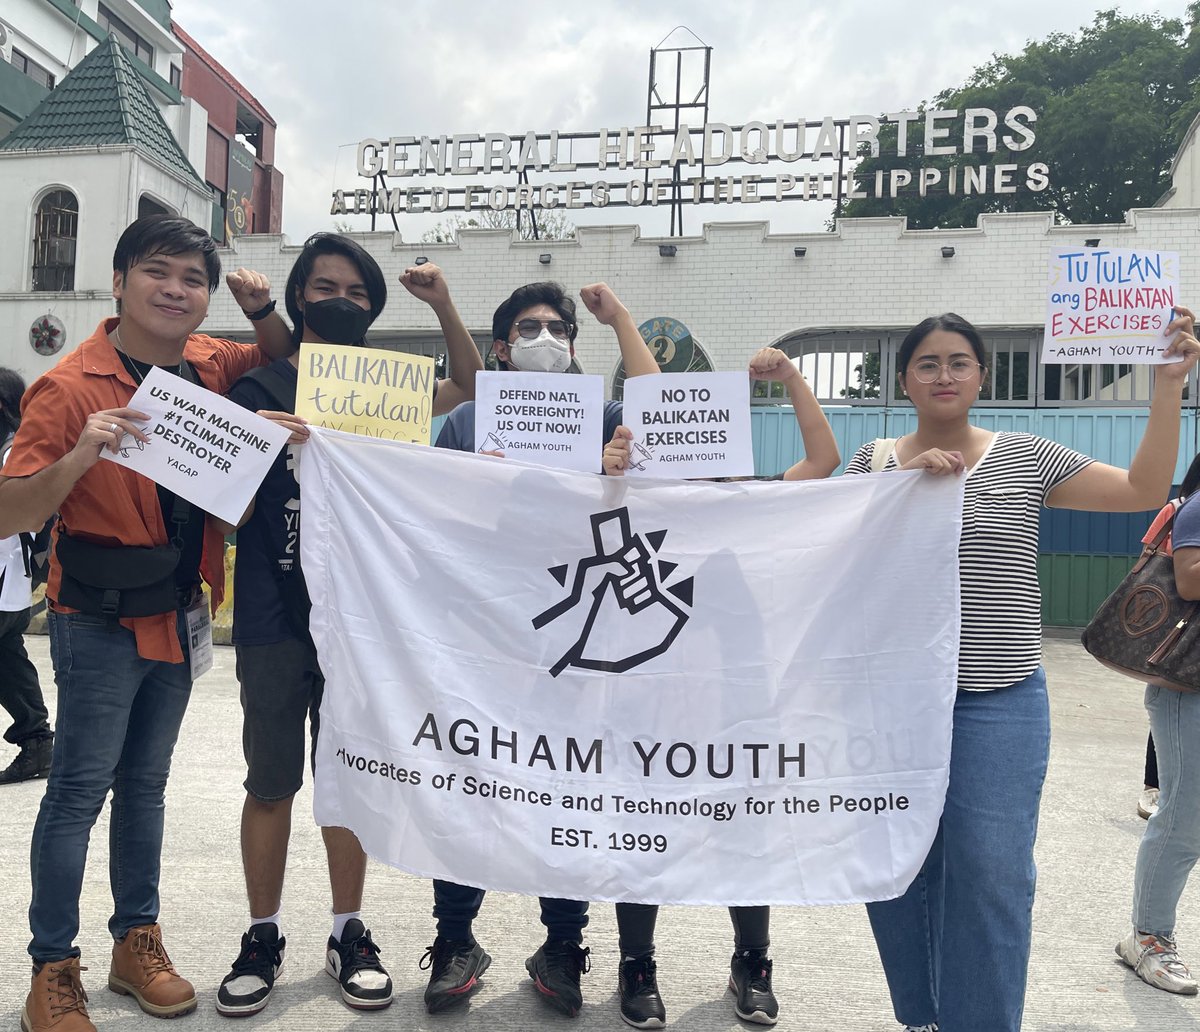 JUST NOW: Agham Youth joins other progressive groups in front of Camp Aguinaldo, in a  protest against the largest Balikatan military exercises in history, which begins today, April 11. 

#NoToBalikatan
#USTroopsOutNow
#EndClimateImperialism